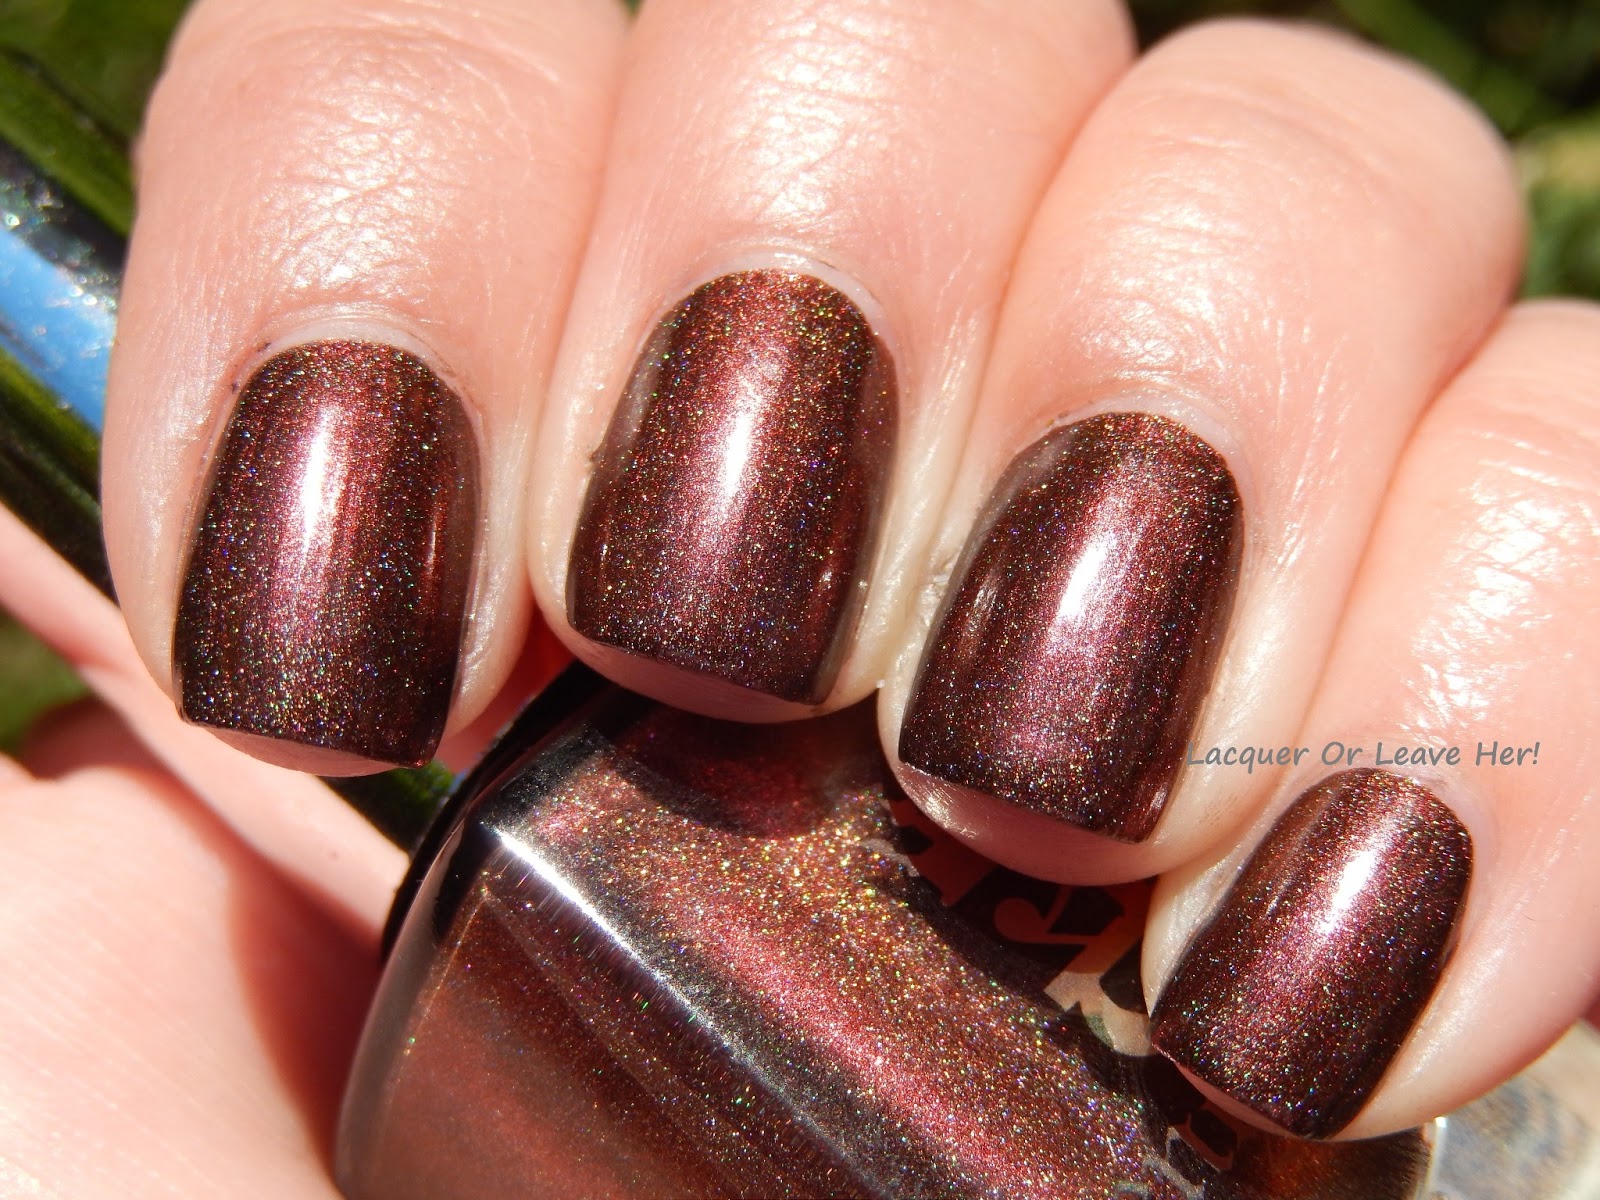 Lacquer or Leave Her!: Before & After: Briars of flowers